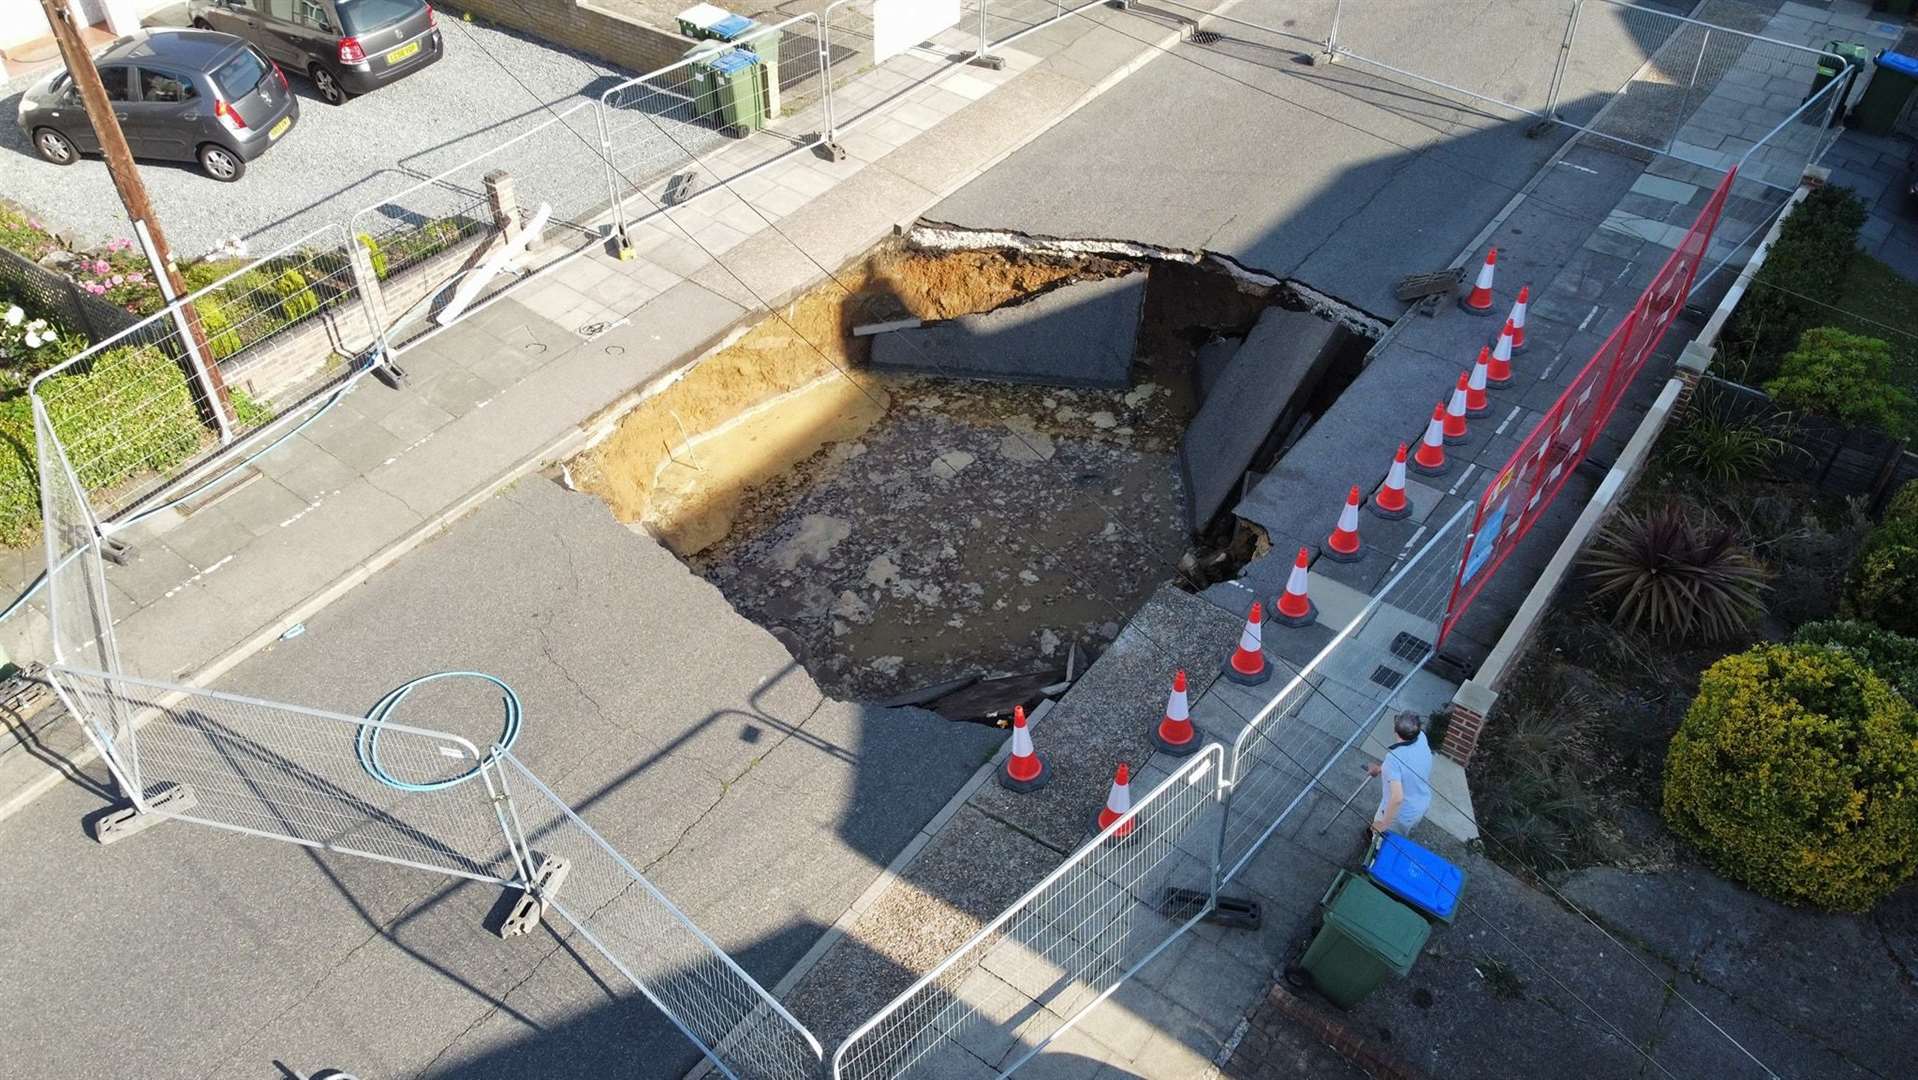 A huge sinkhole has opened up in the middle of the street in Martens Avenue, Bexleyheath. Photo: Mike Stevens